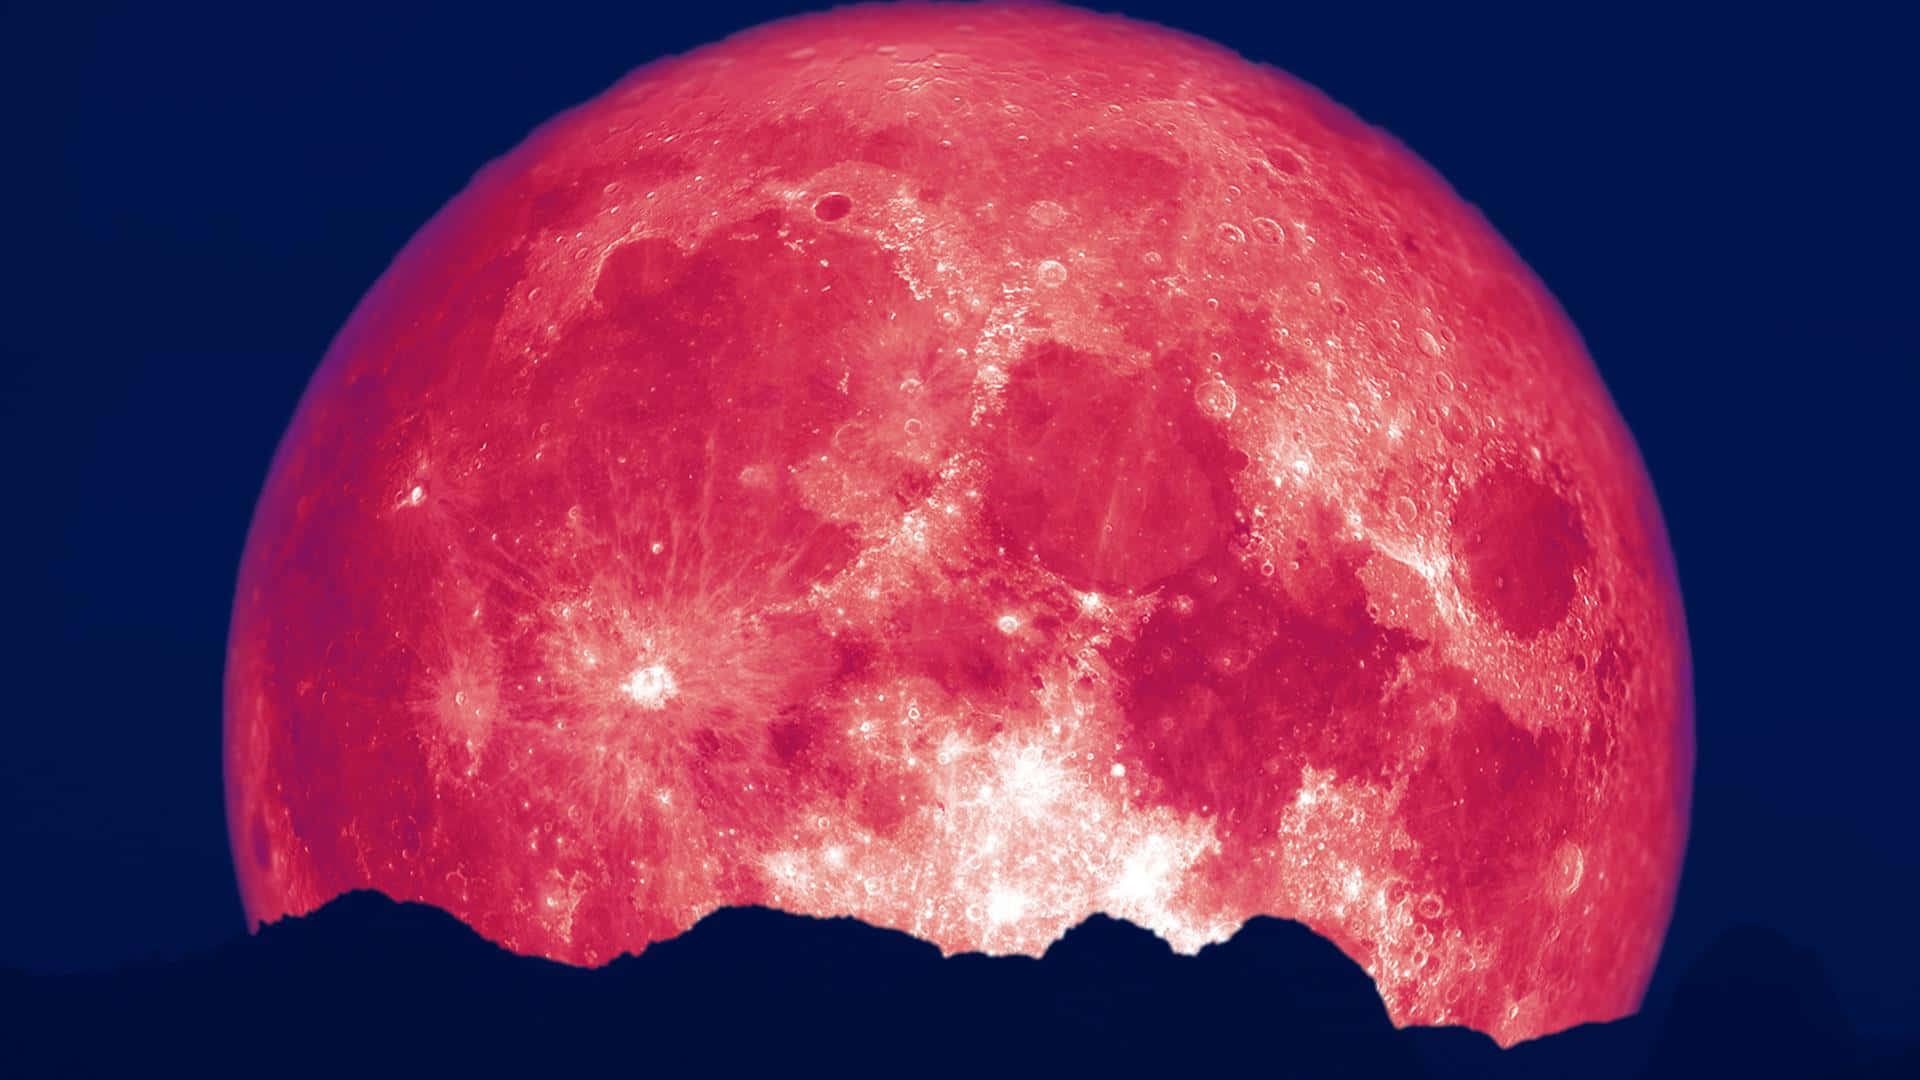 A romantic pink moon in the night sky